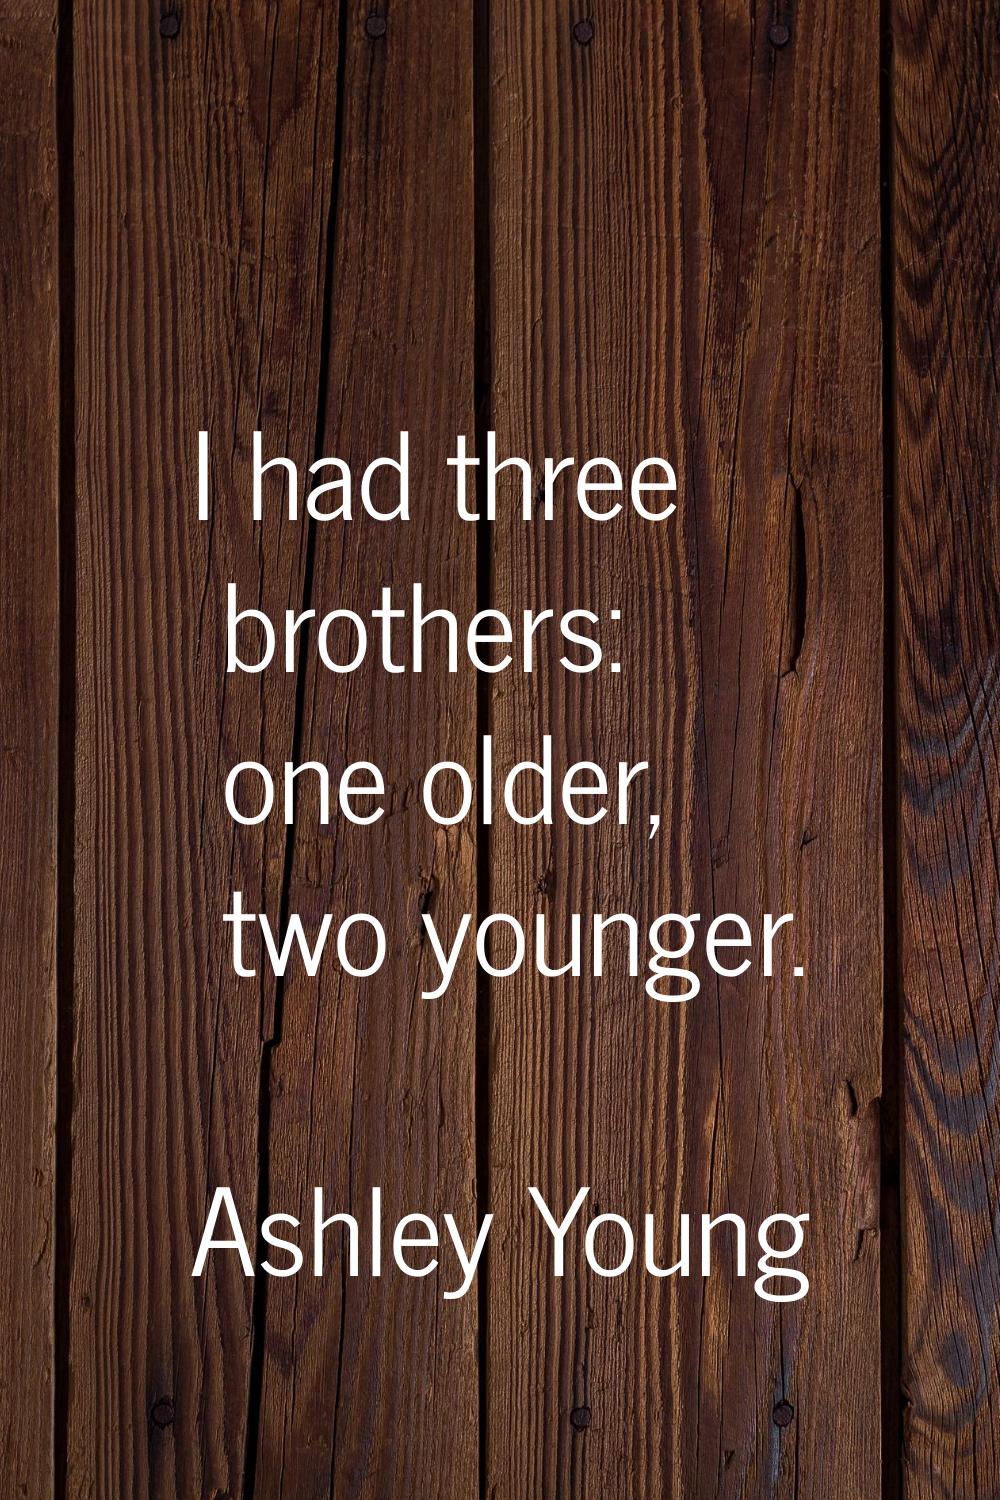 I had three brothers: one older, two younger.